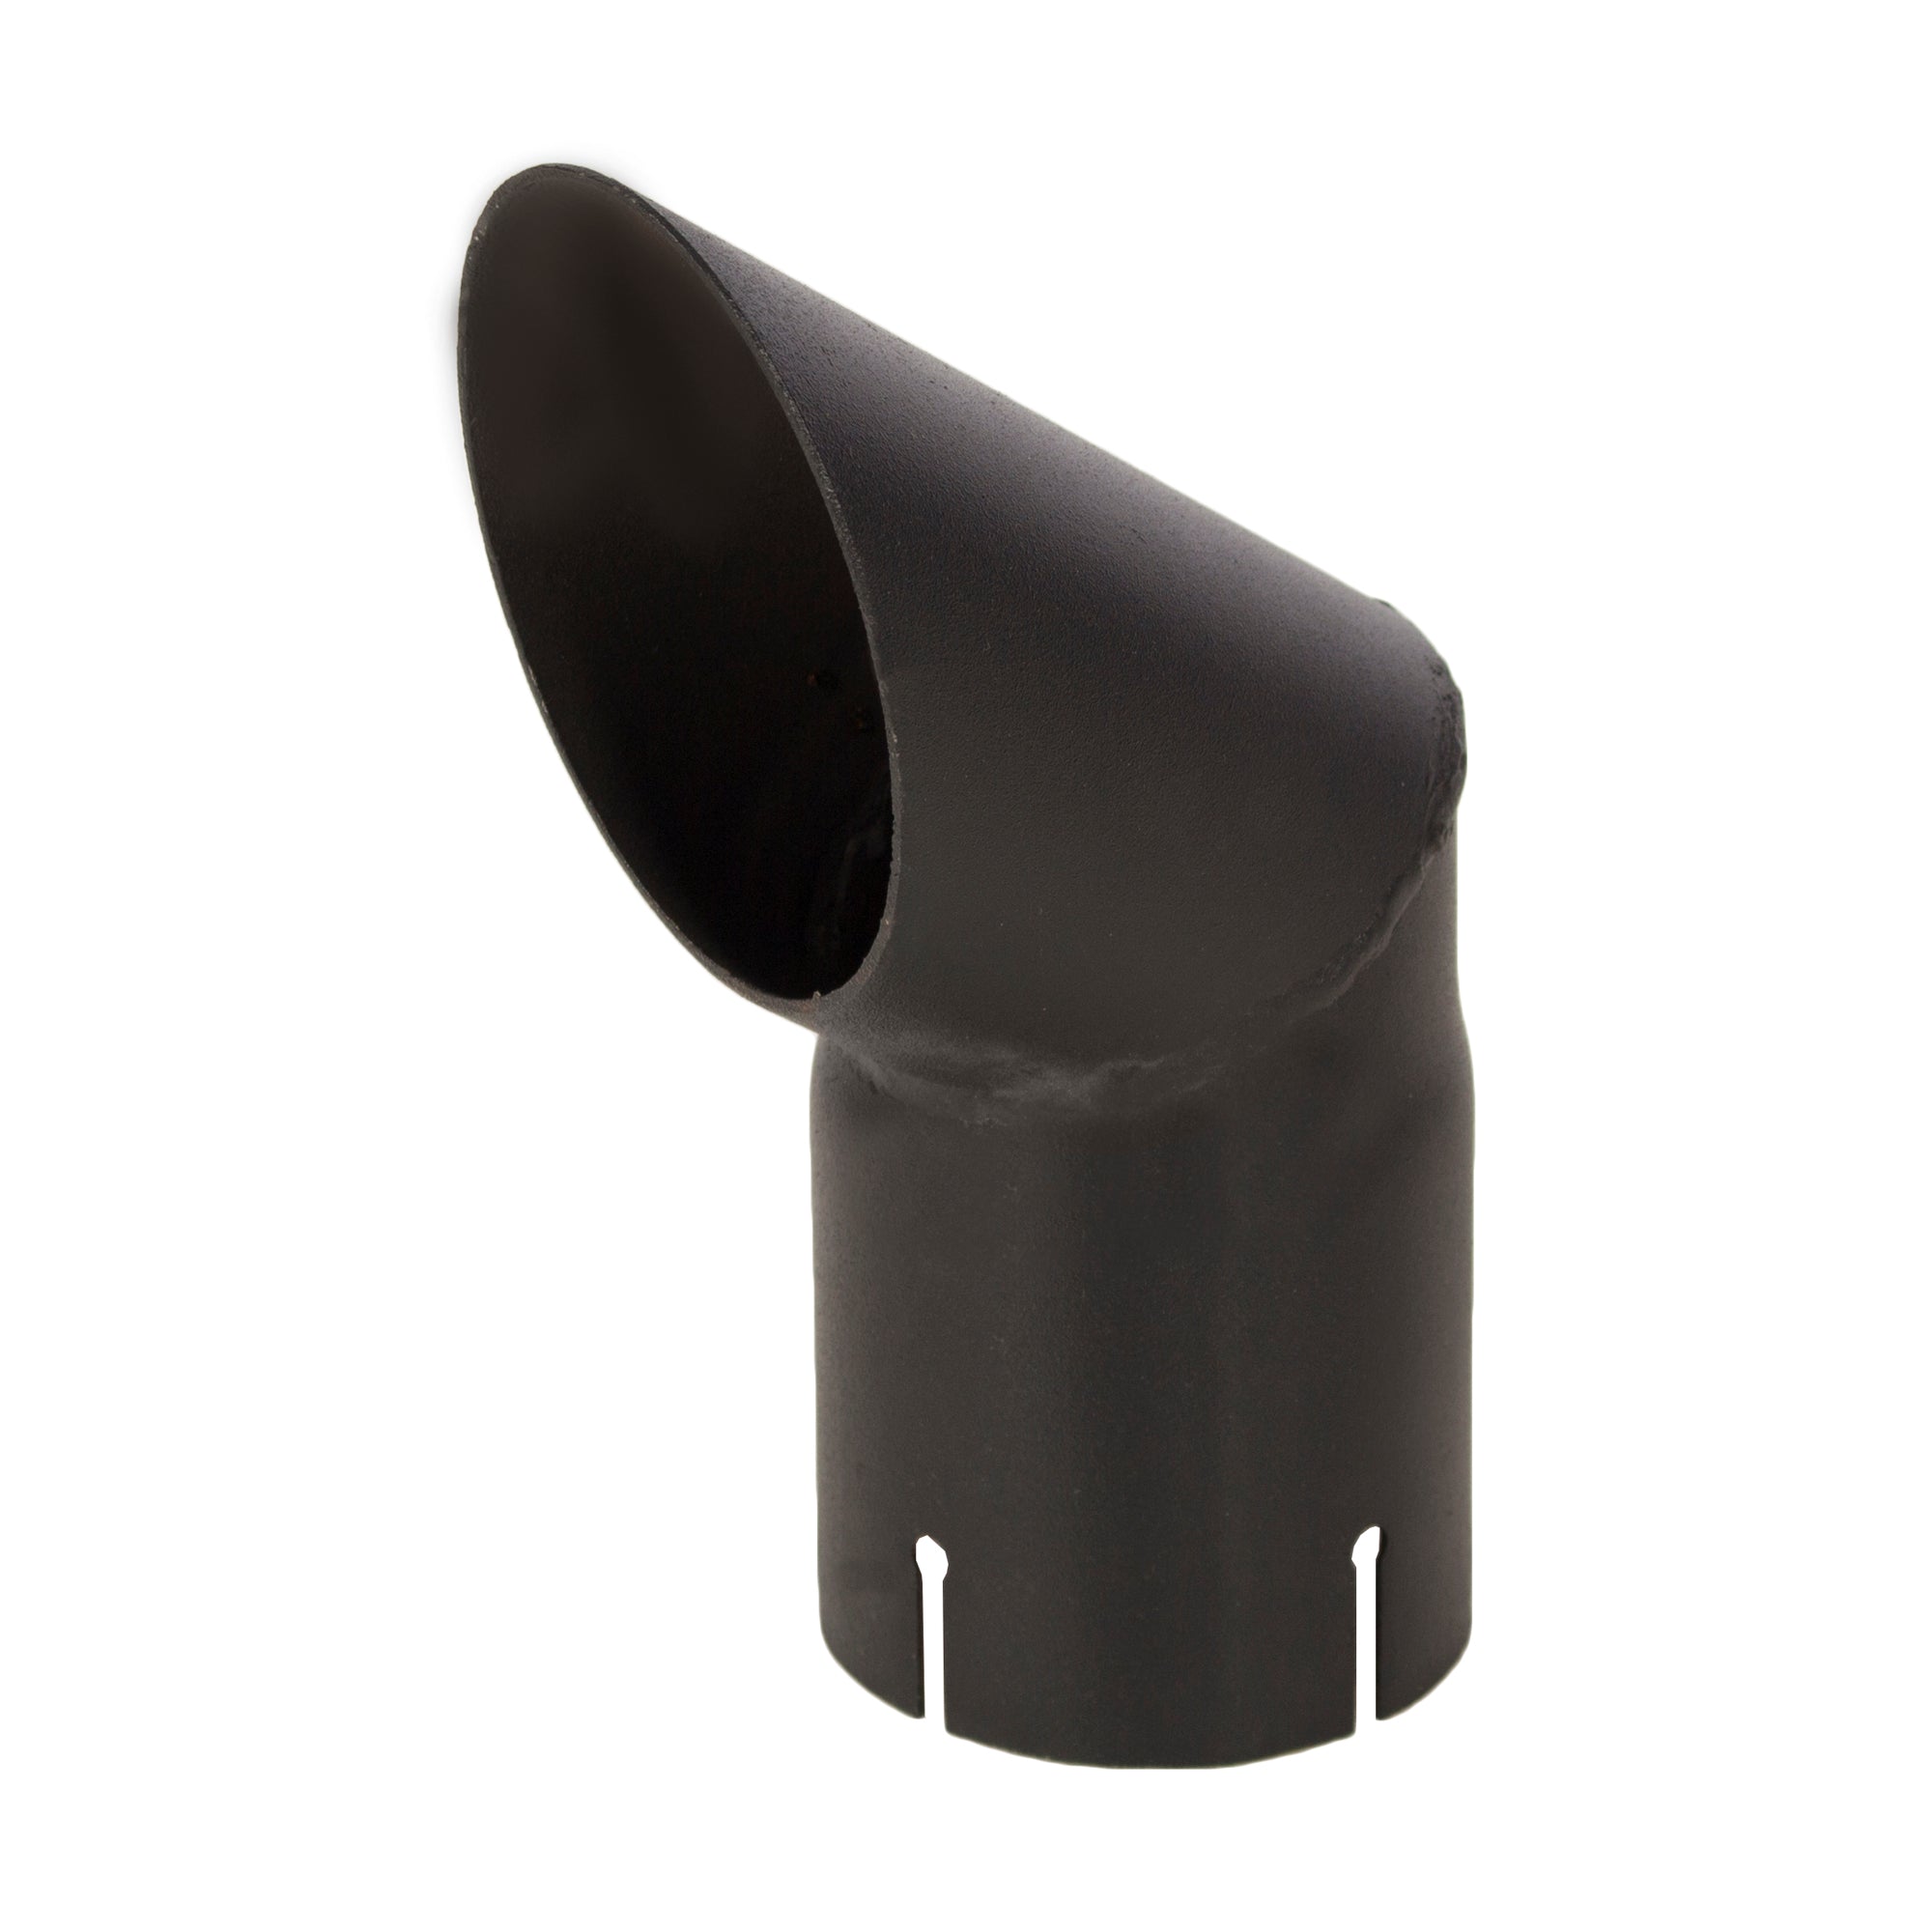 Exhaust Stack Pipe Replacement for UNIVERSAL- 2-3/4" x 8,46" Curved Black